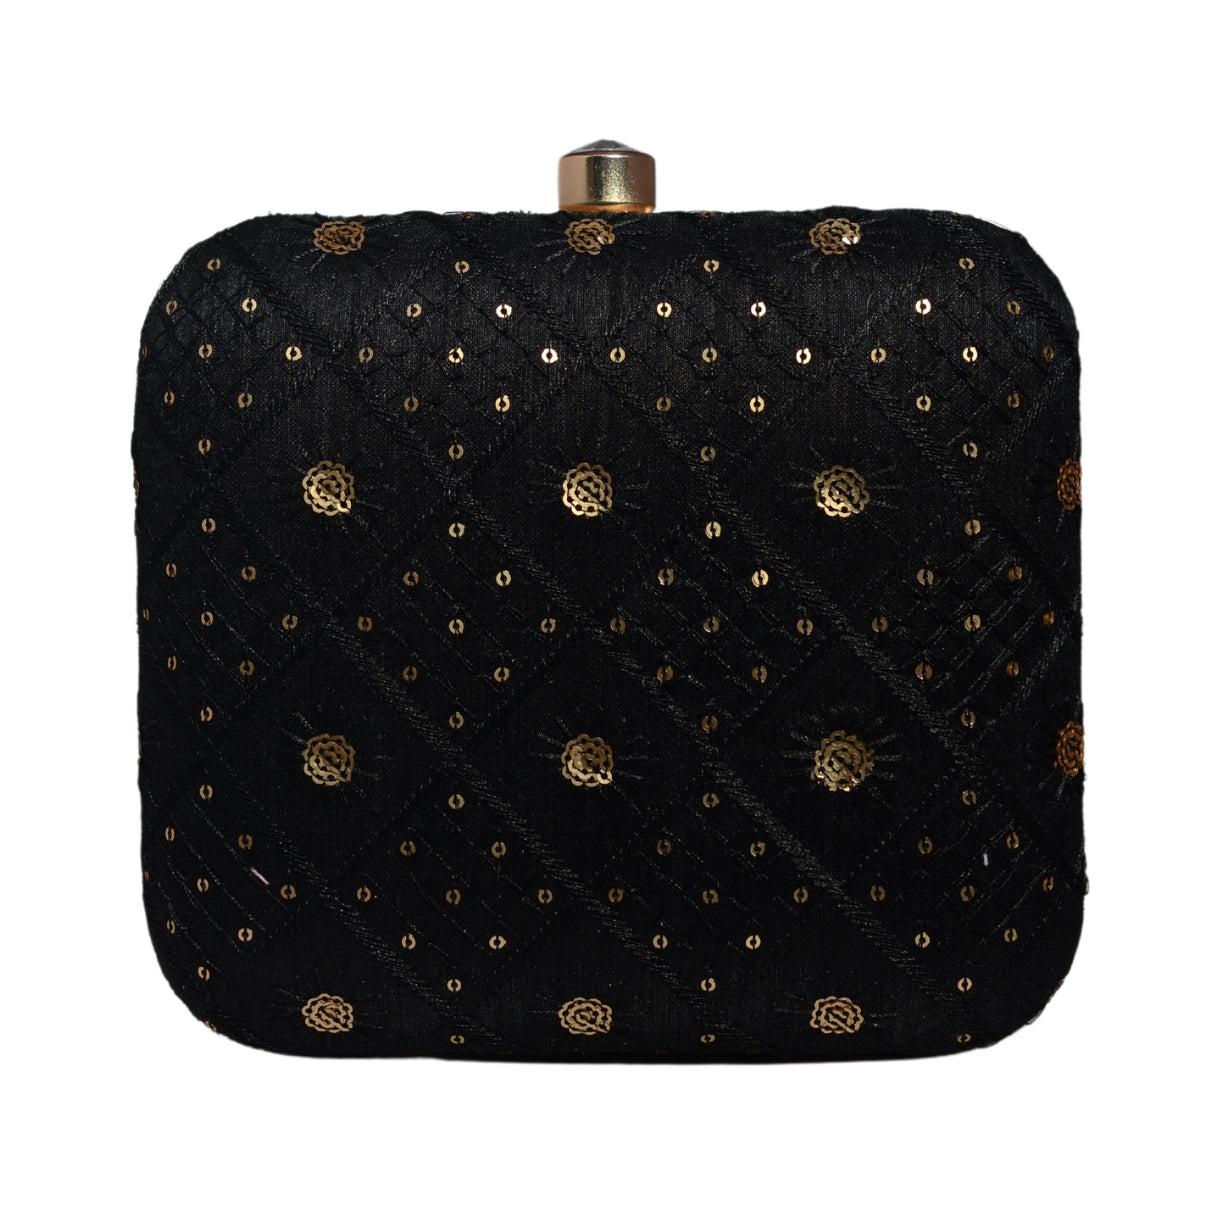 Black Box Pattern Sequins Embroidery Clutch